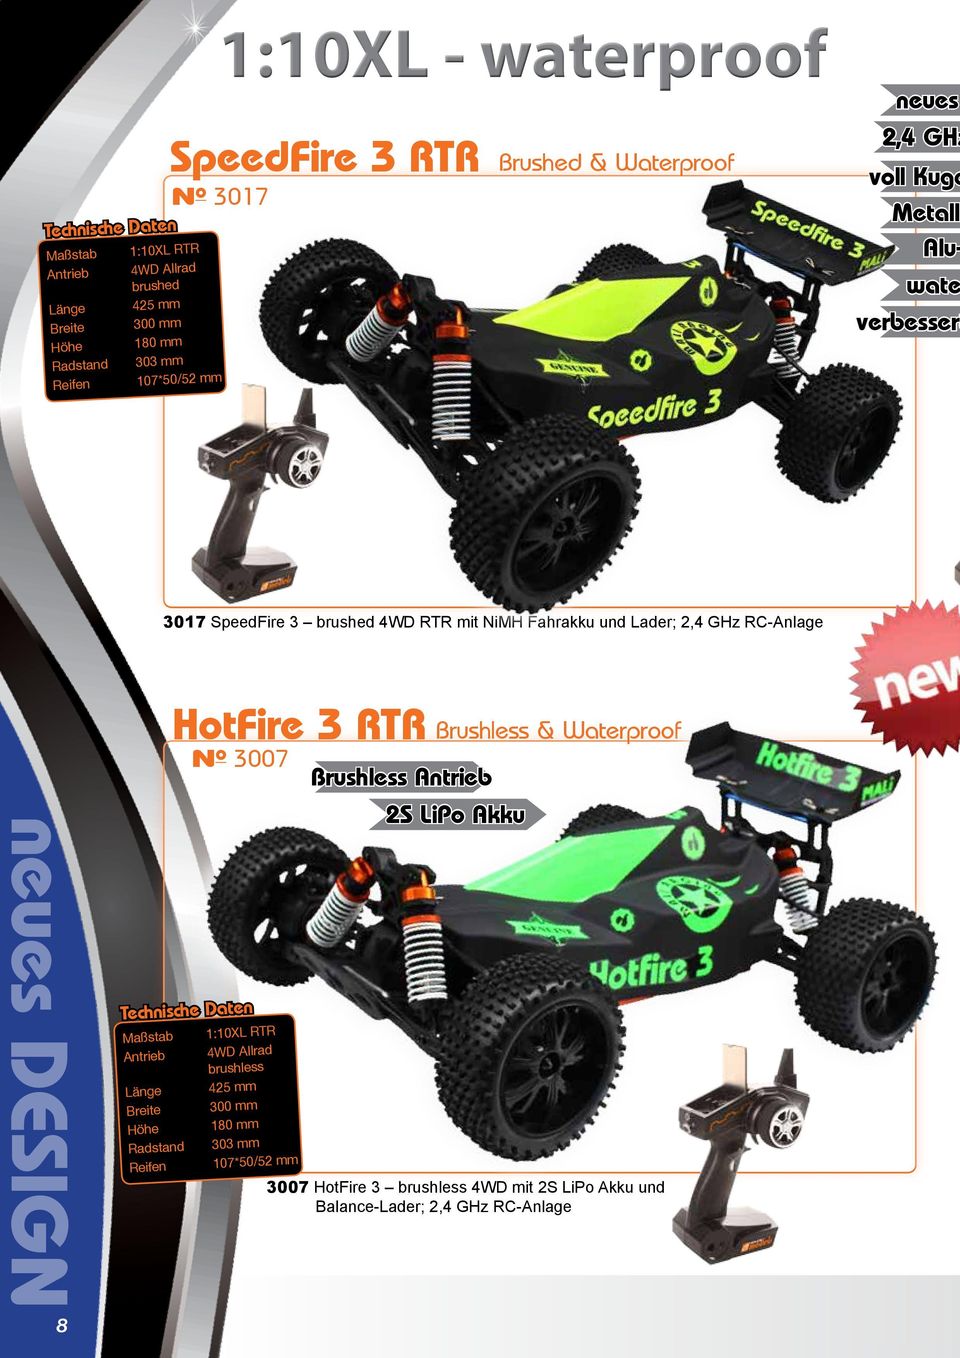 2,4 GHz RC-Anlage neues DESIGN 8 HotFire 3 RTR N o 3007 Maßstab 1:10XL RTR brushless Länge 425 mm Breite 300 mm Höhe 180 mm Radstand 303 mm